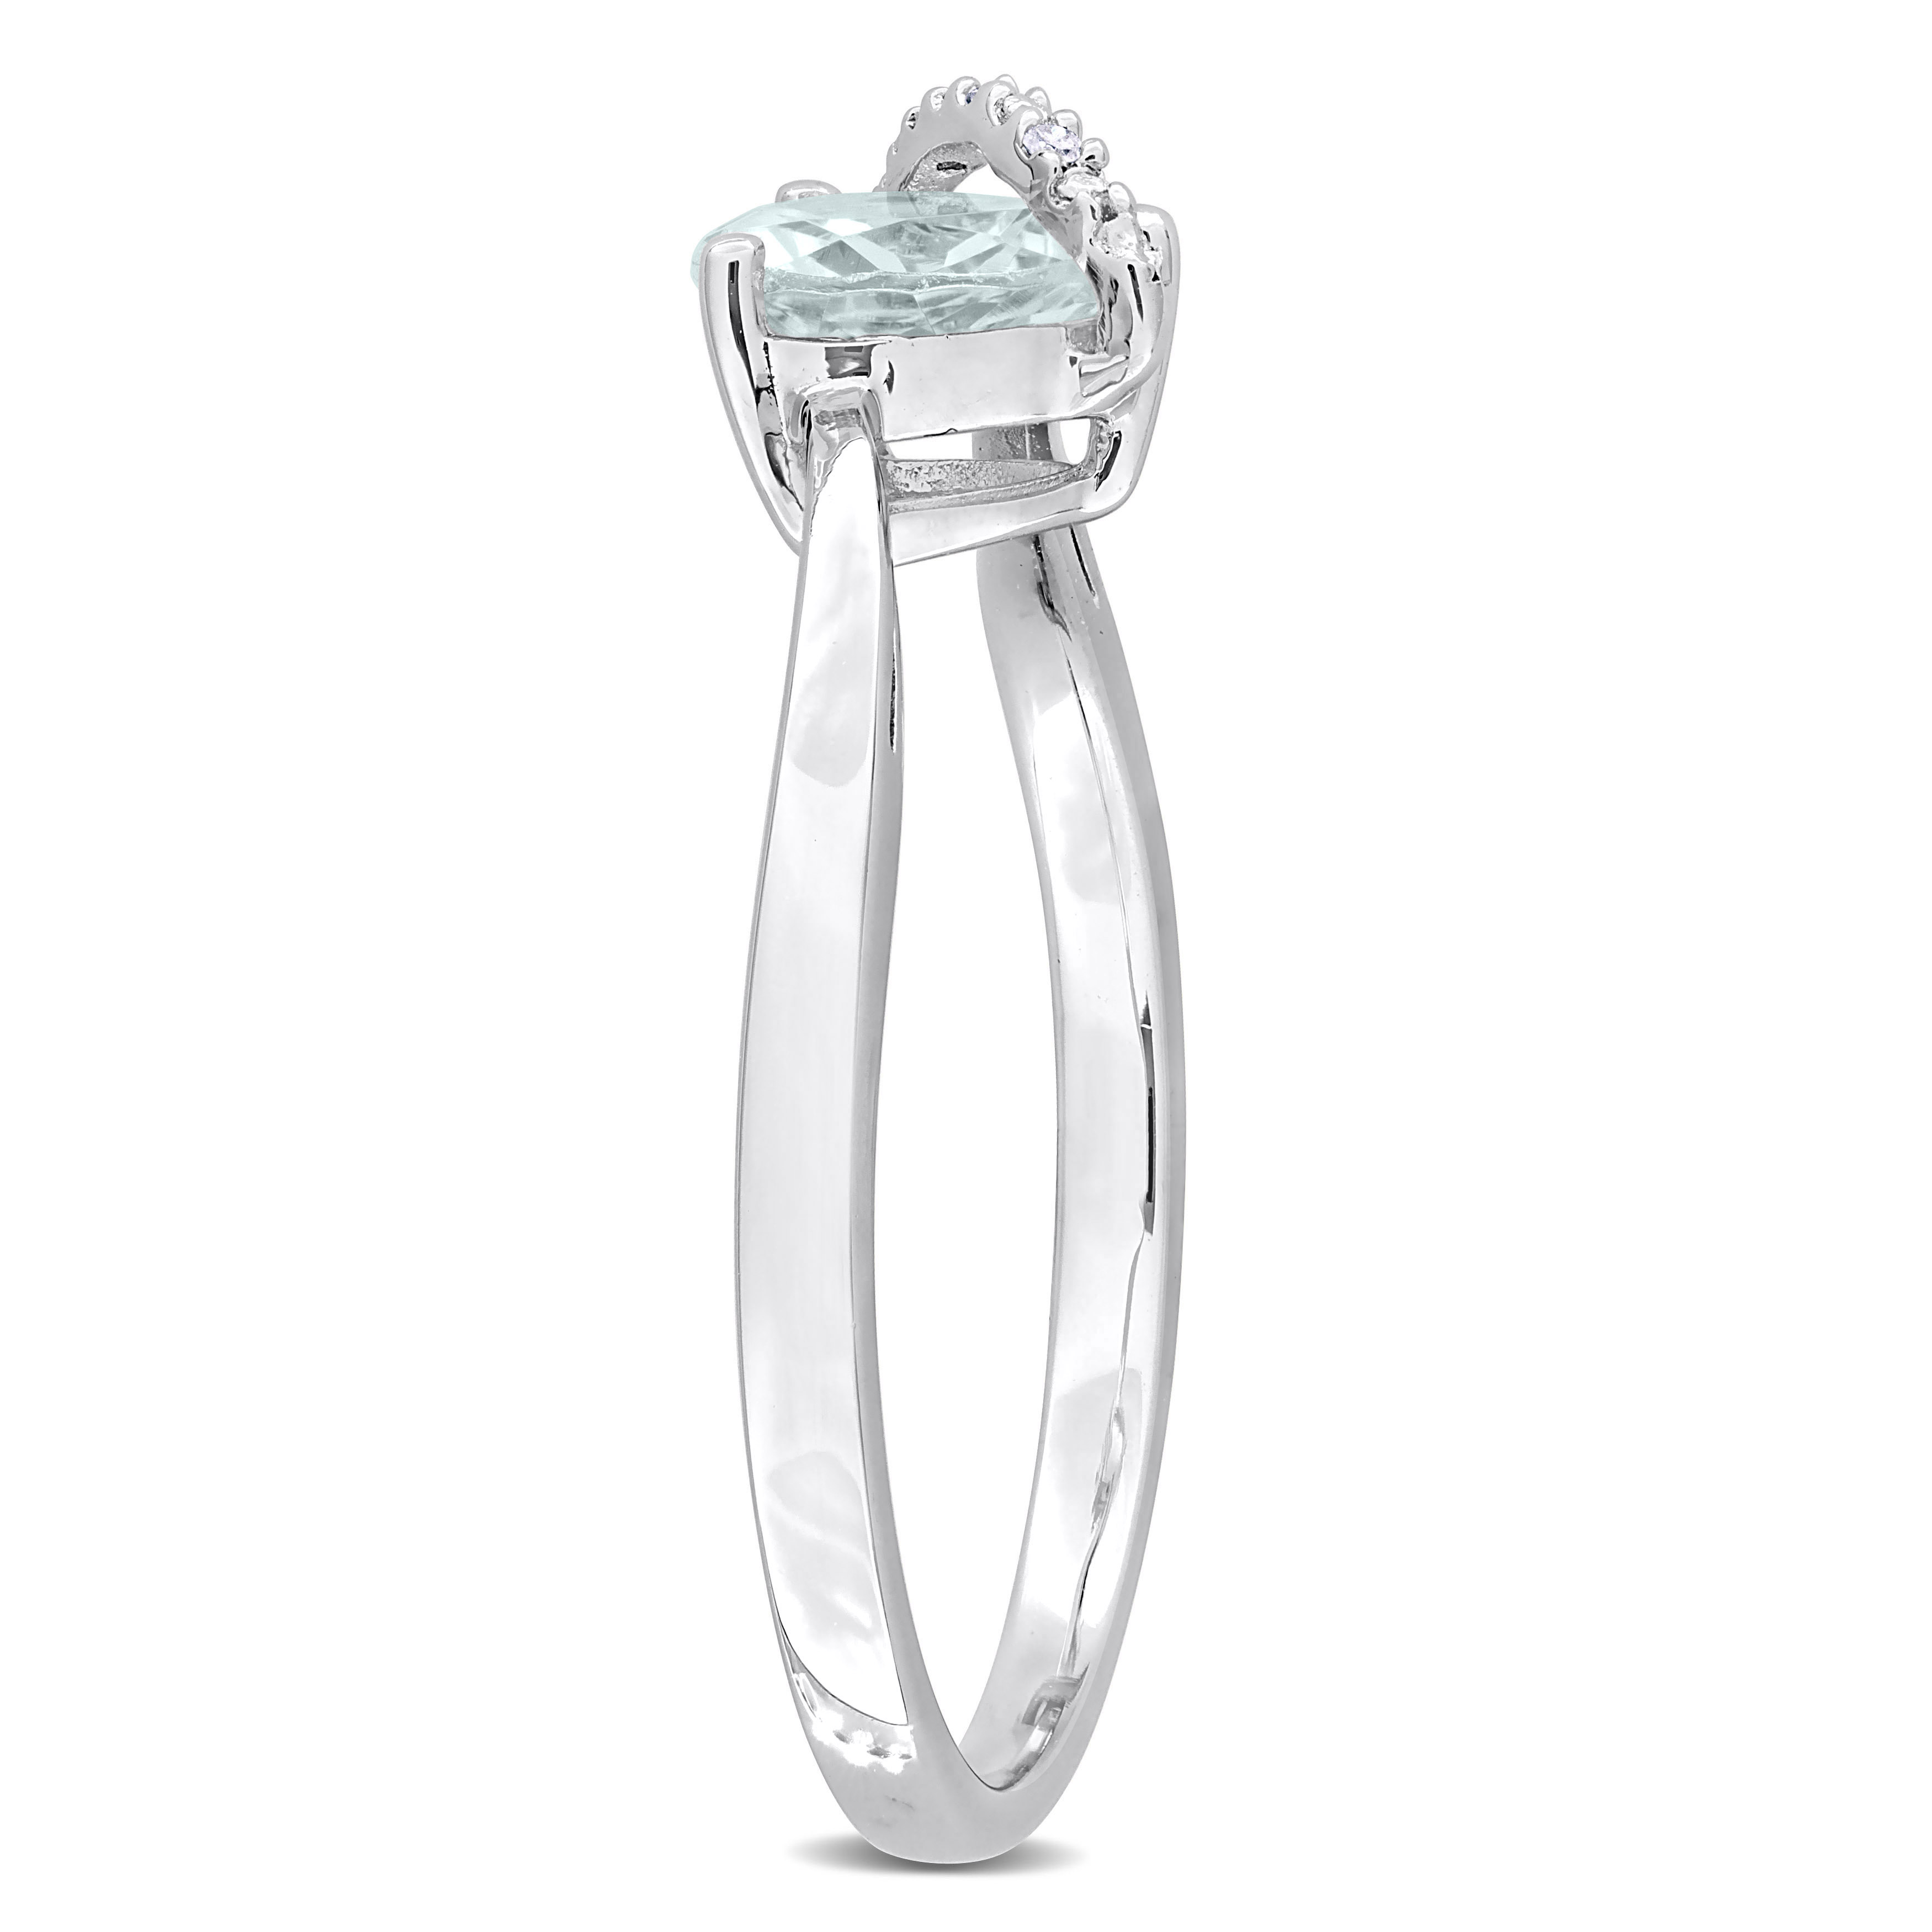 5/8 CT TGW Heart Shape Aquamarine and Diamond Accent Wrap Ring in Sterling Silver